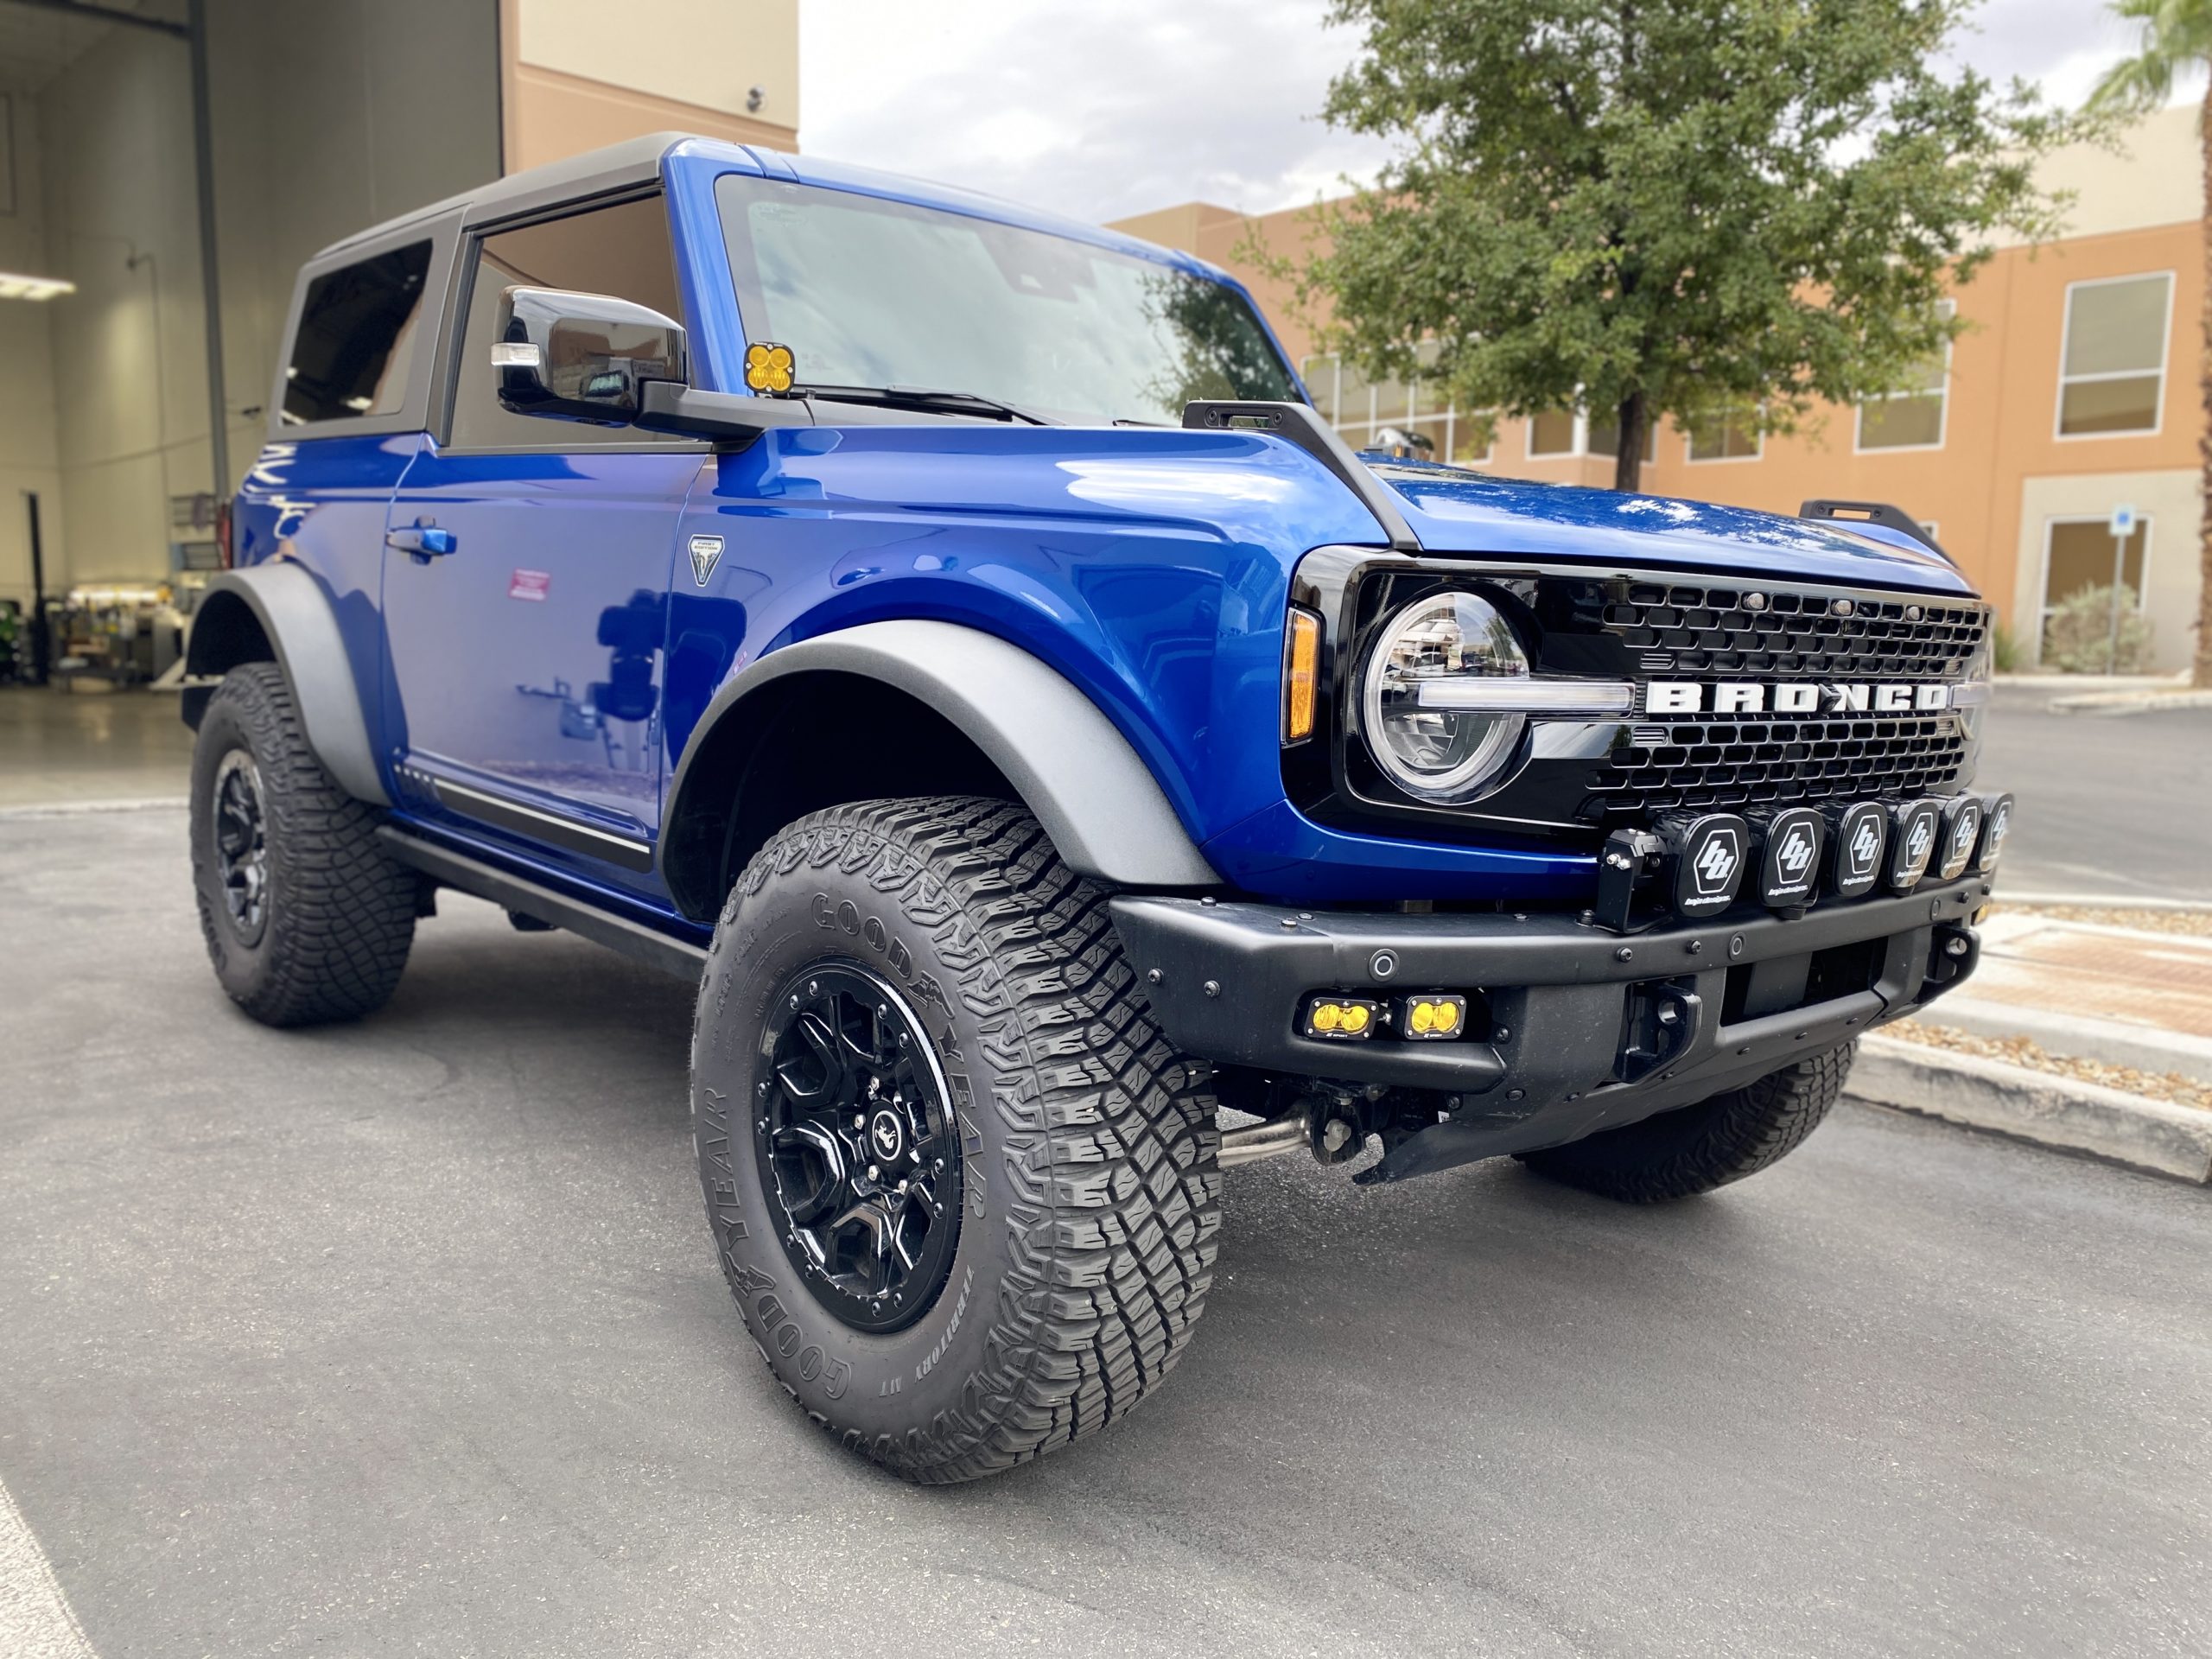 2021 Ford Bronco full front ultimate plus ppf